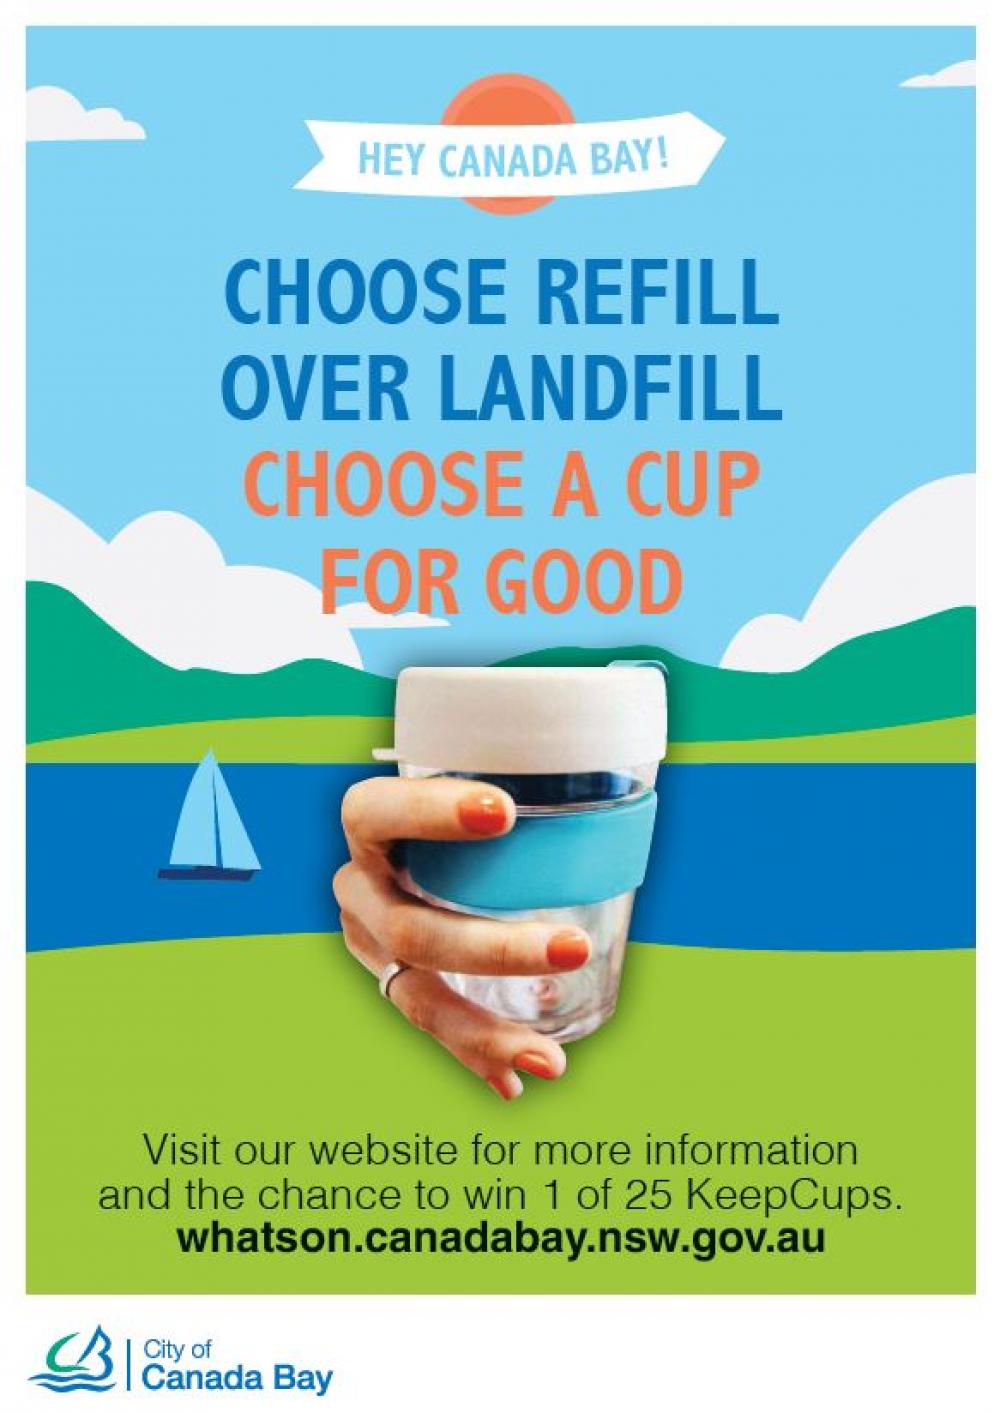 Choose refill over landfill and win!